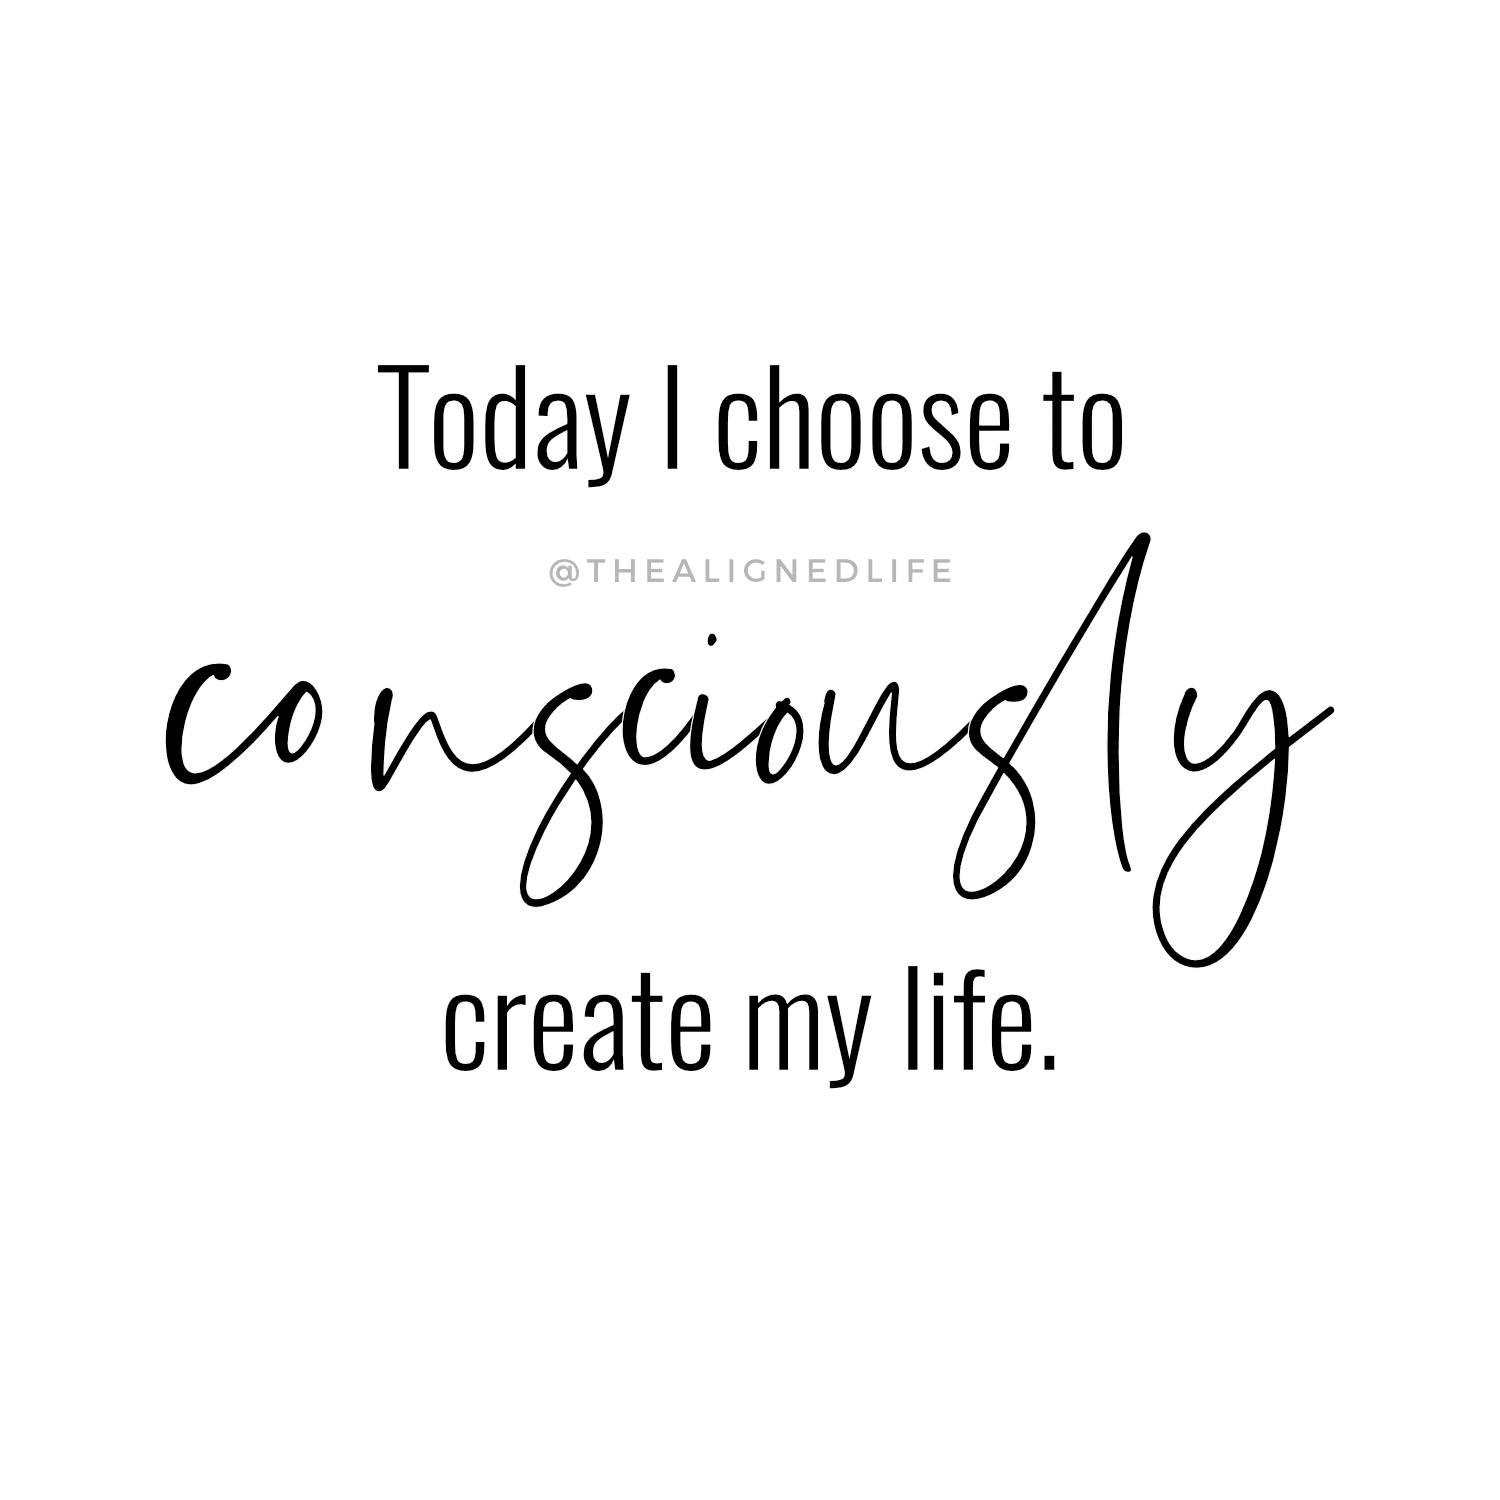 Today I choose to consciously create my life | manifestation quotes